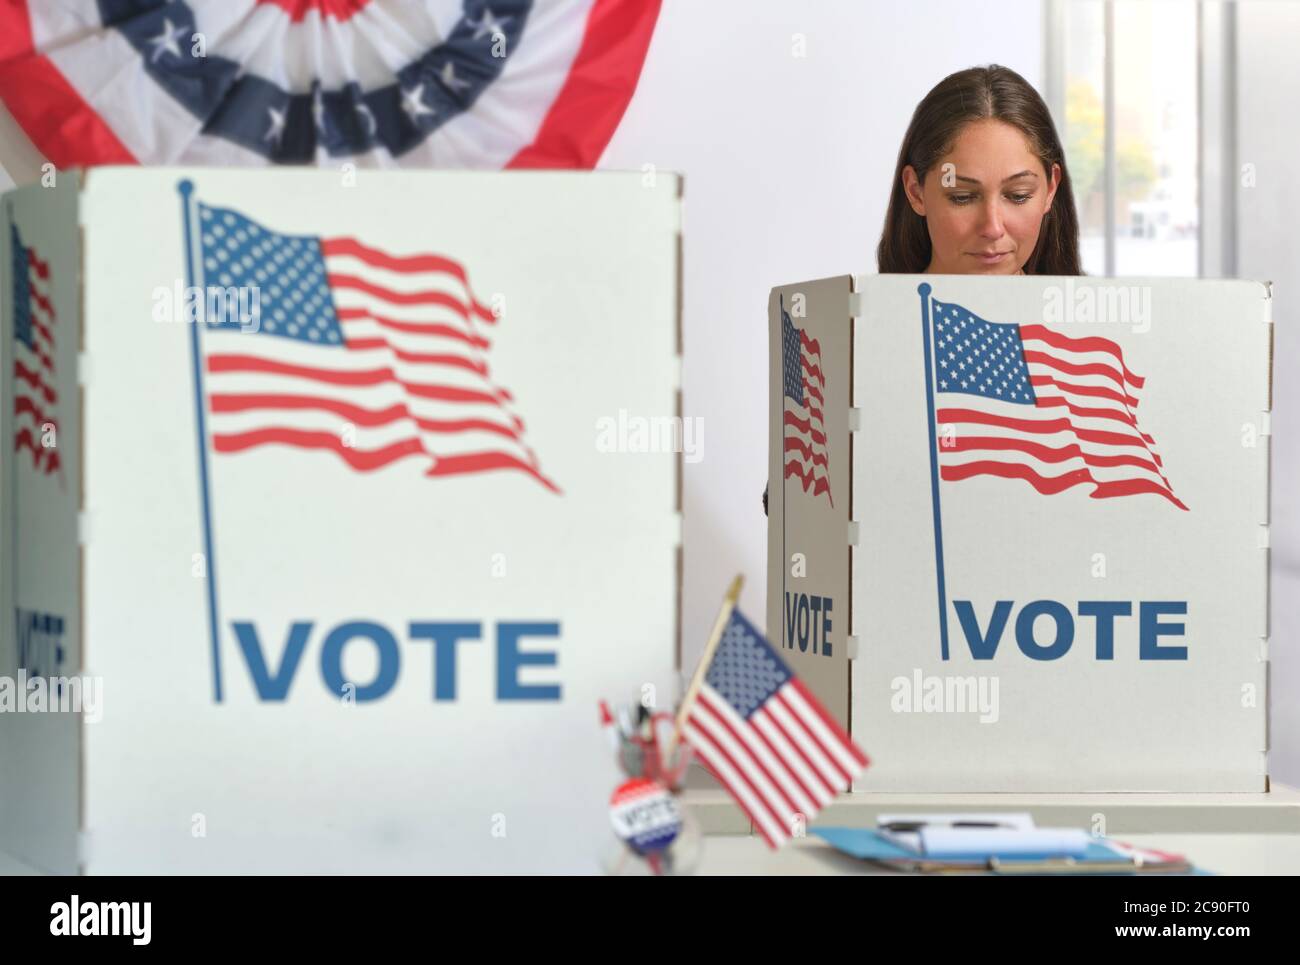 Woman voting in polling place Stock Photo